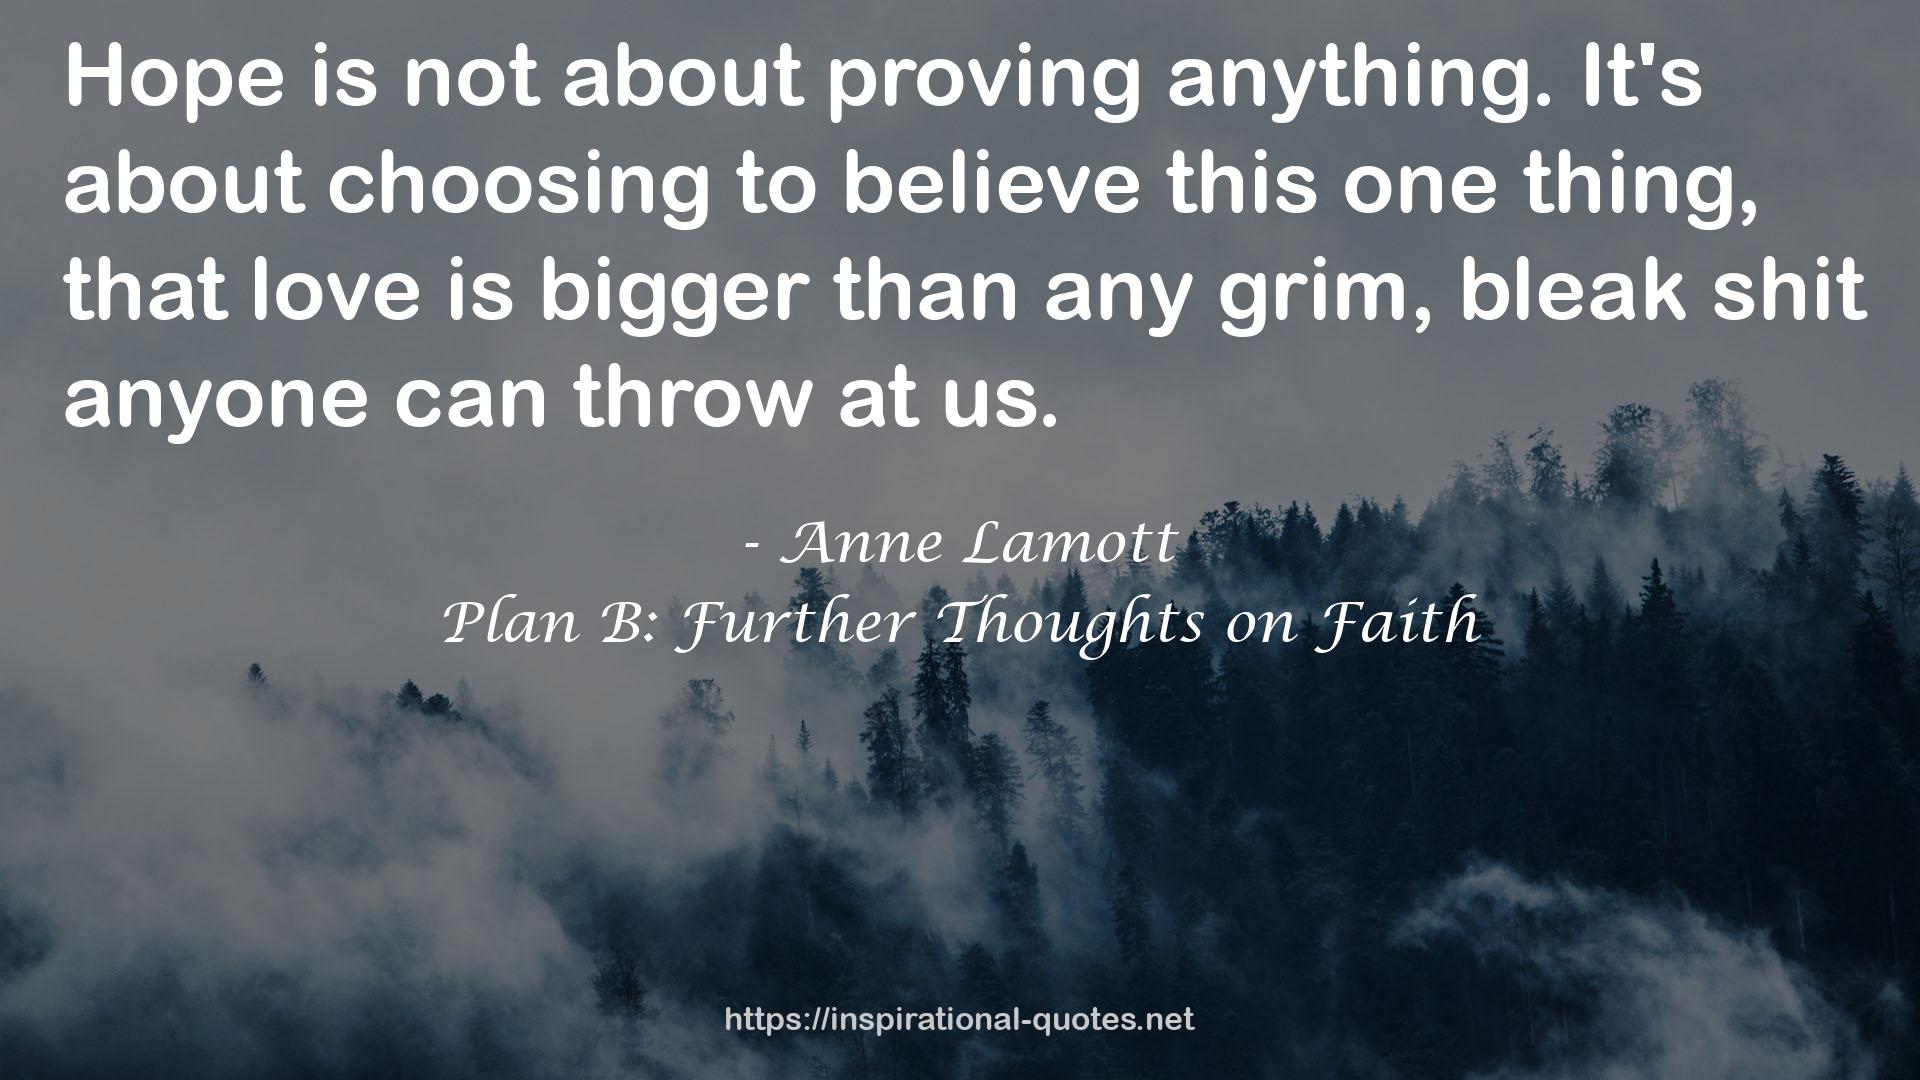 Plan B: Further Thoughts on Faith QUOTES